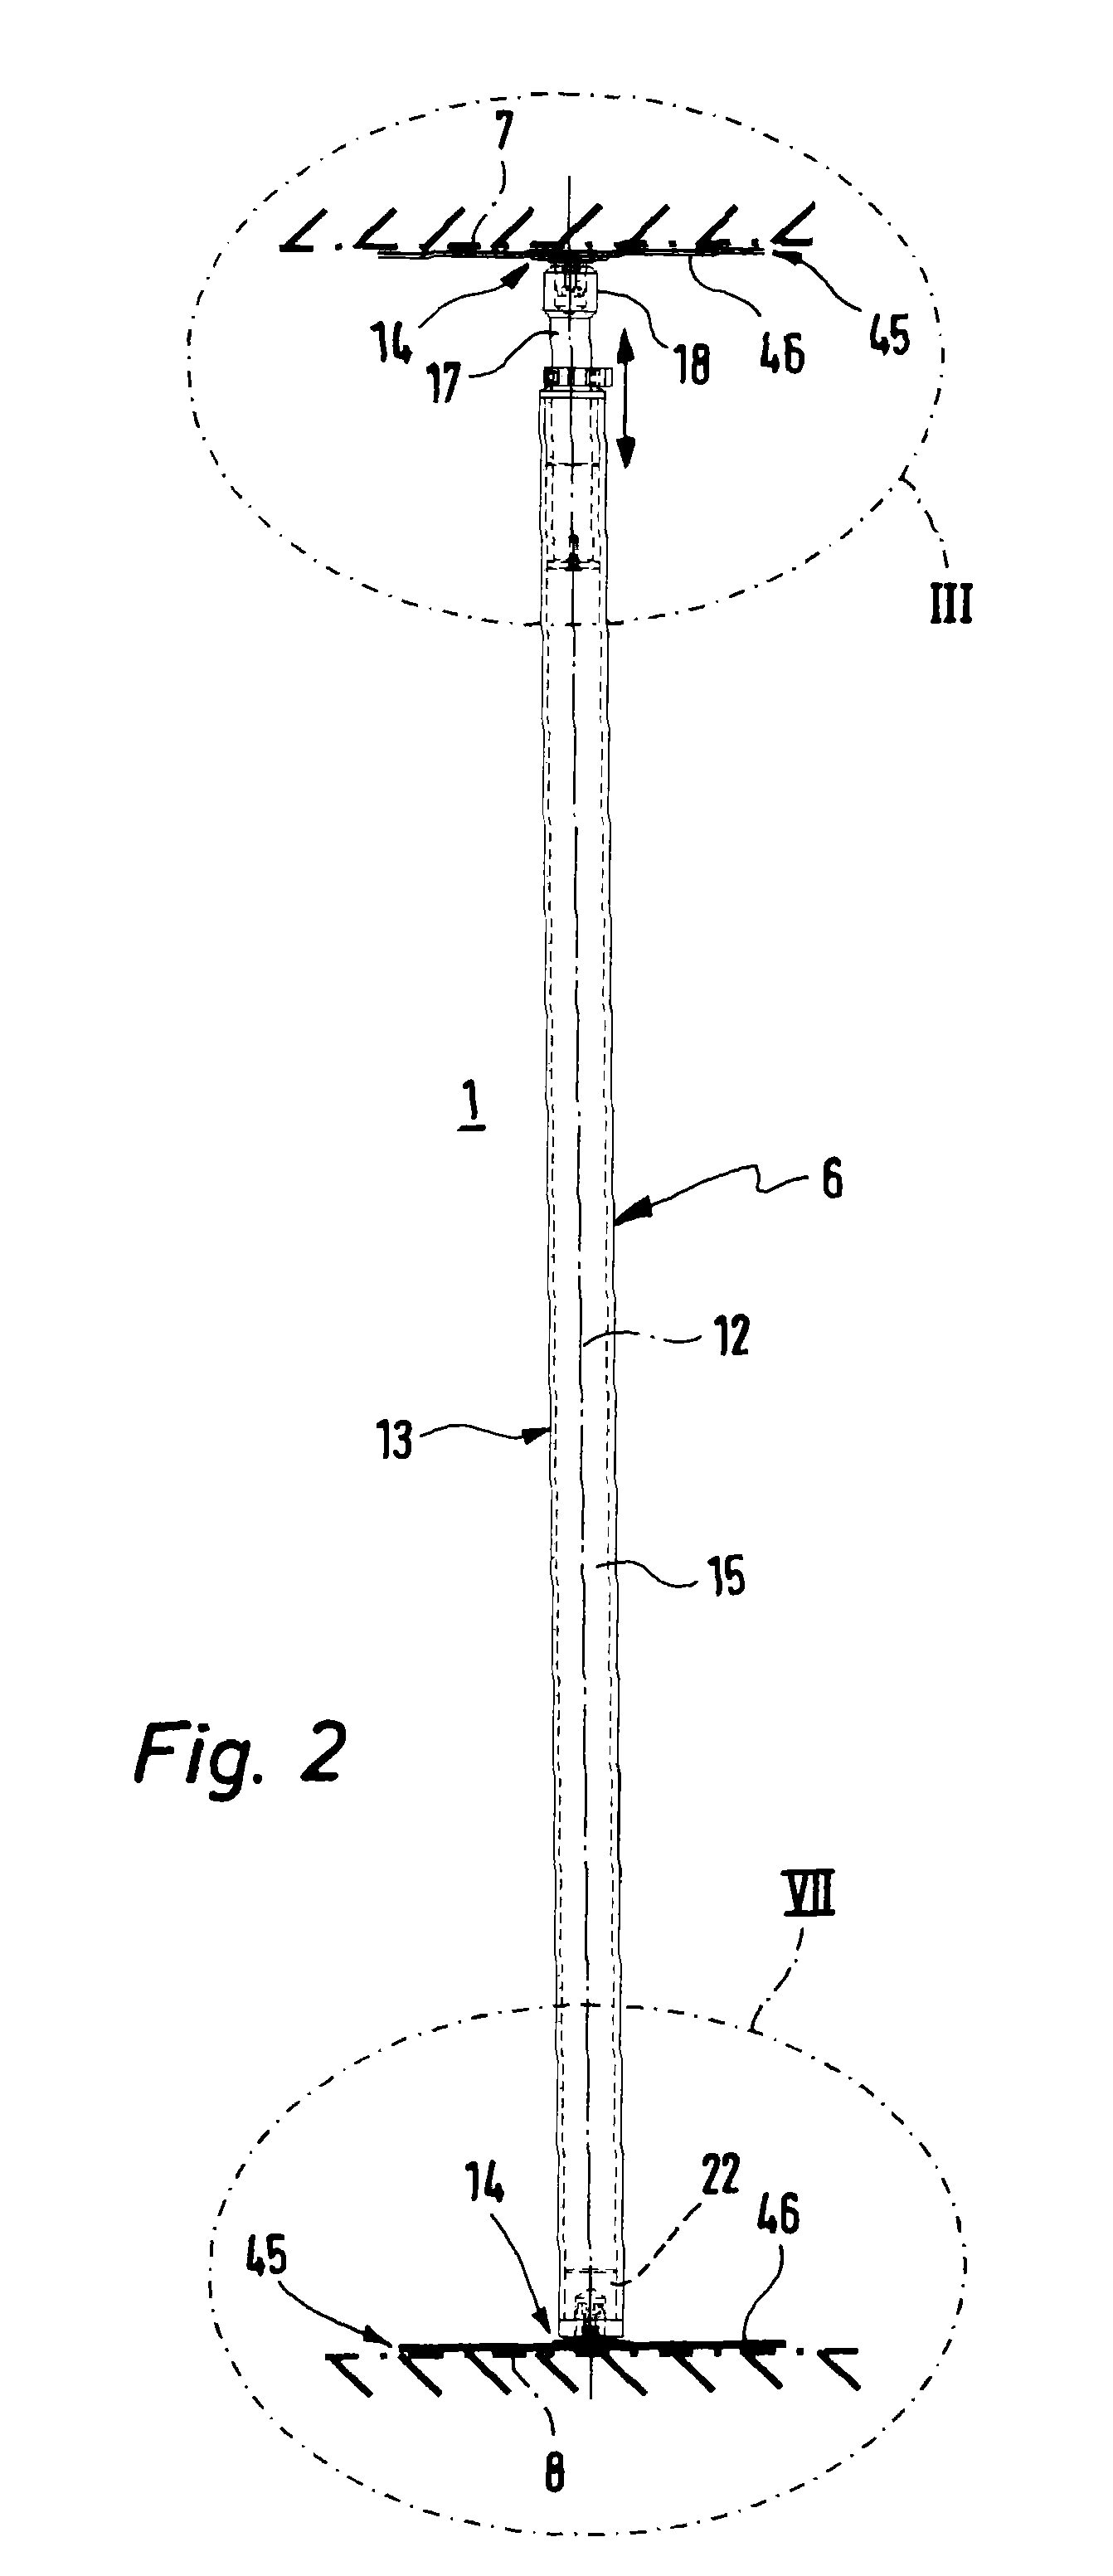 Retaining device for vehicle interiors